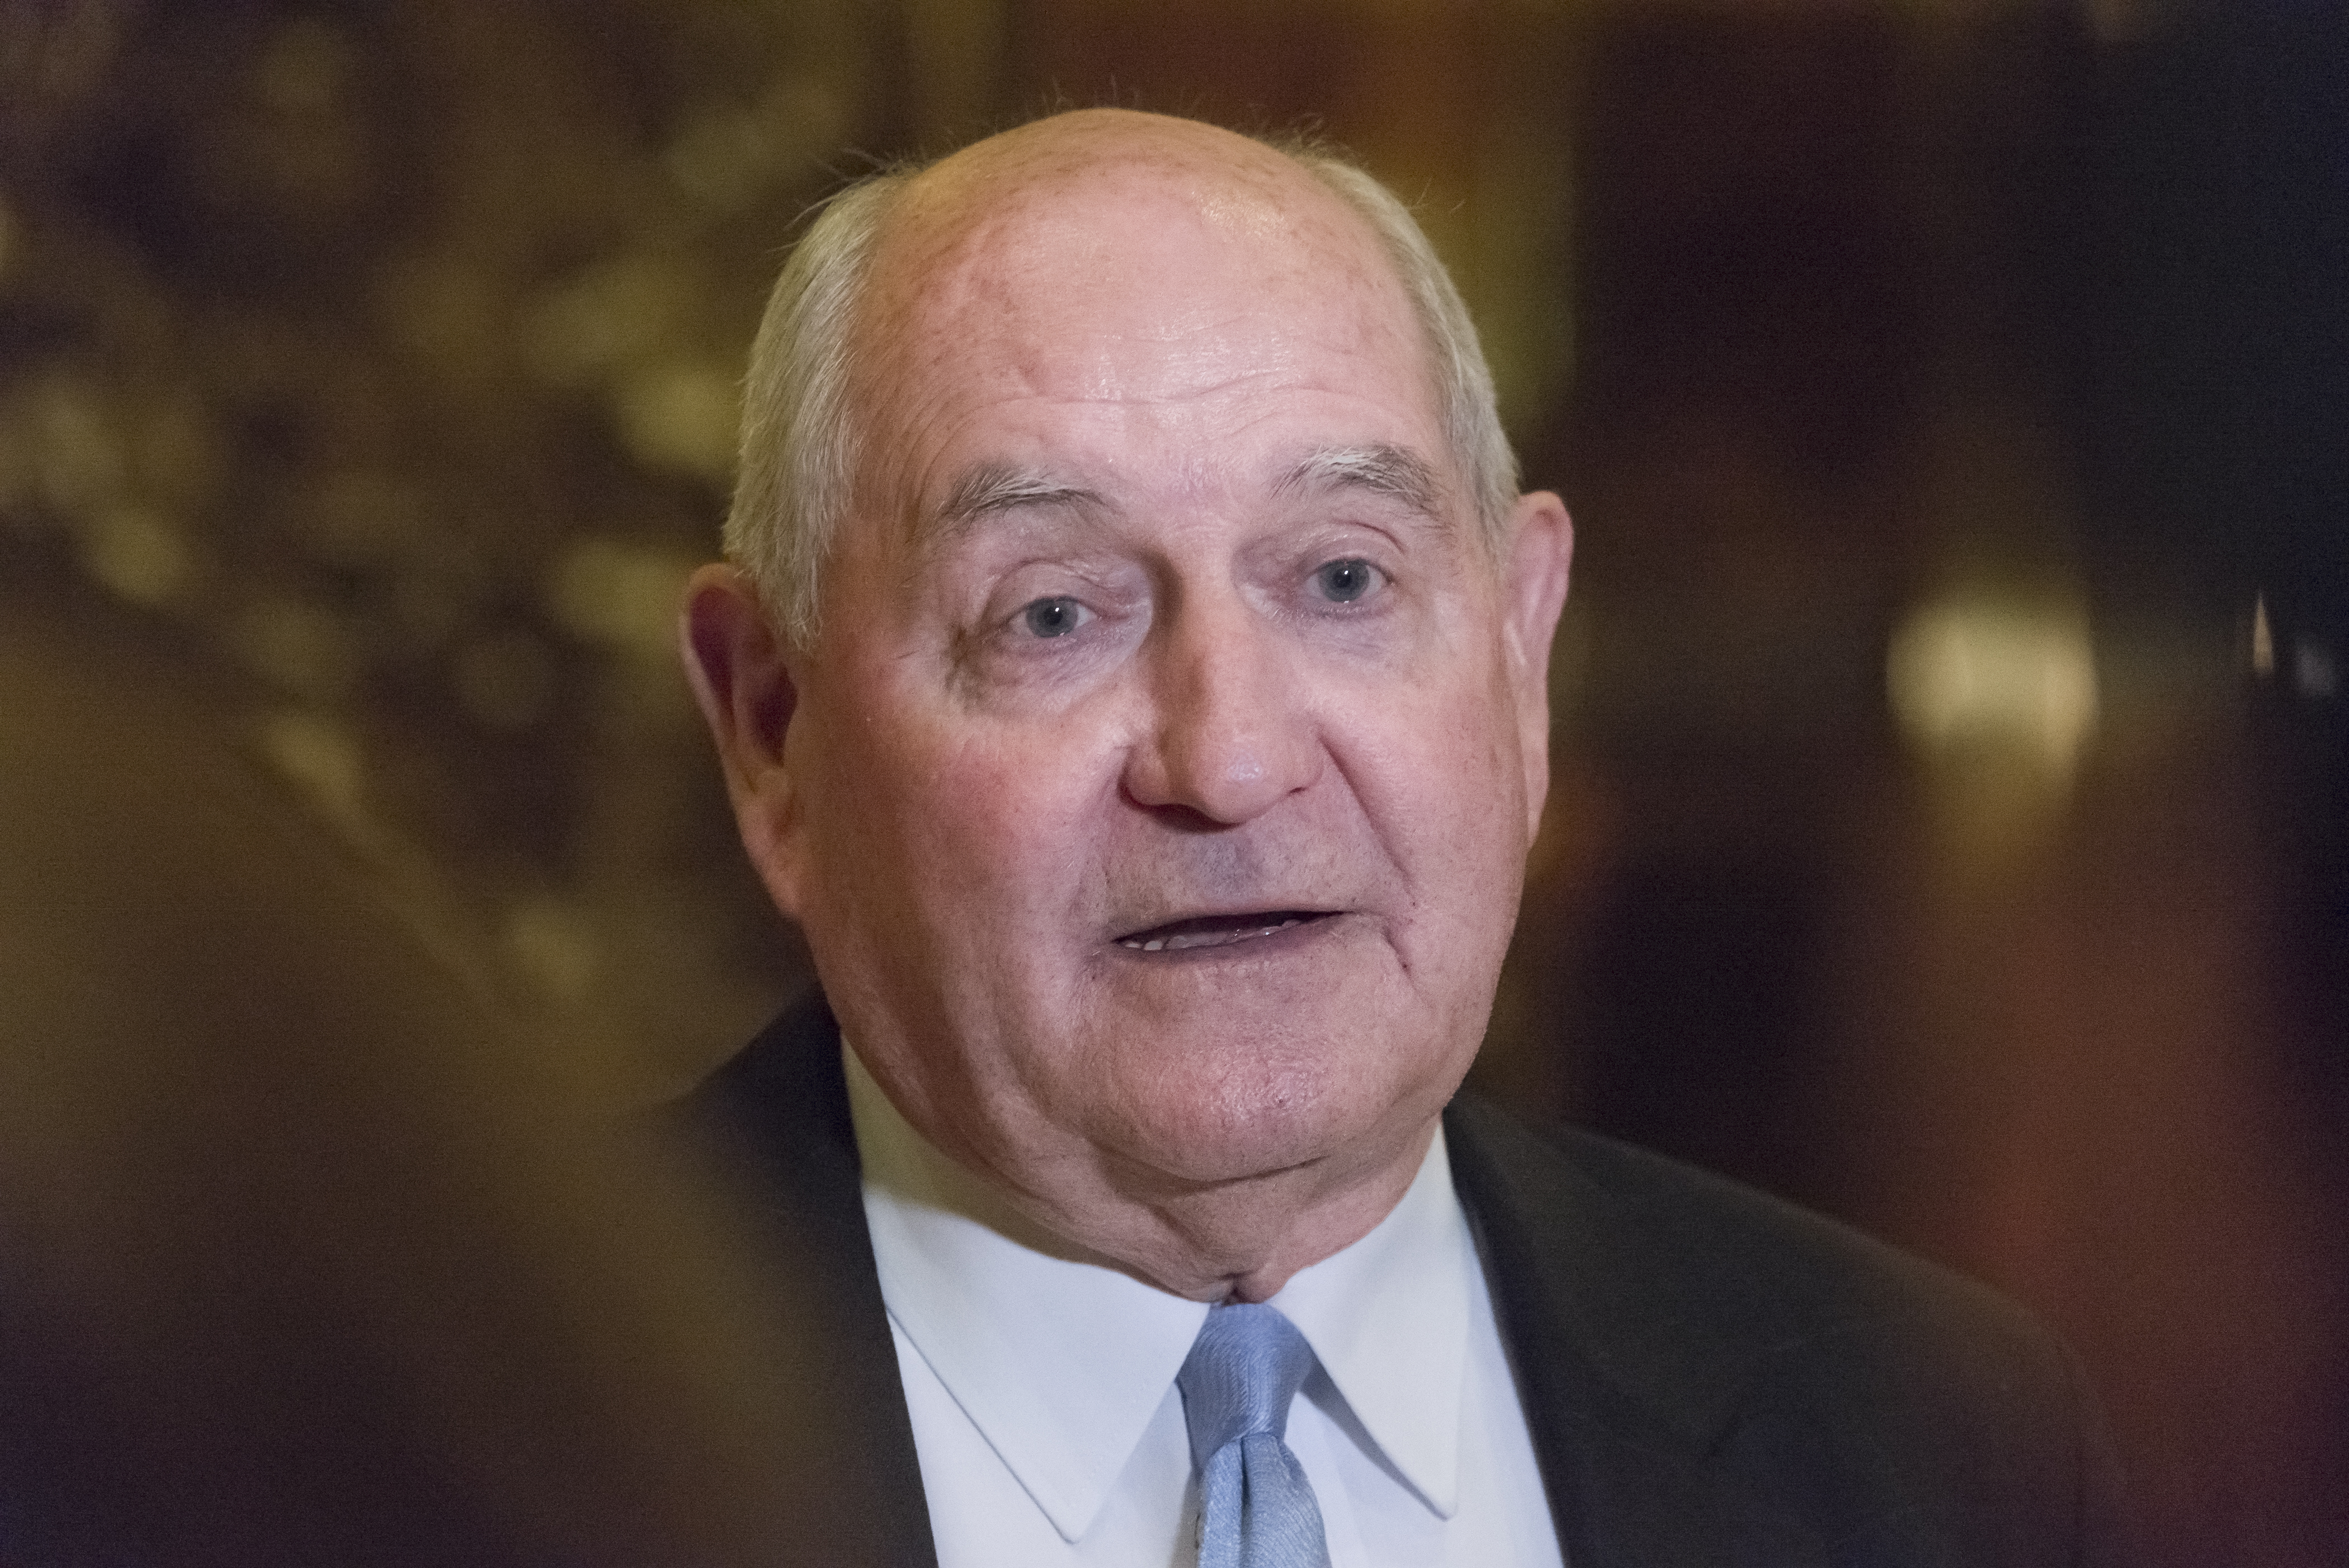 SonnyWatch: Why Perdue’s confirmation hearing is still TBD